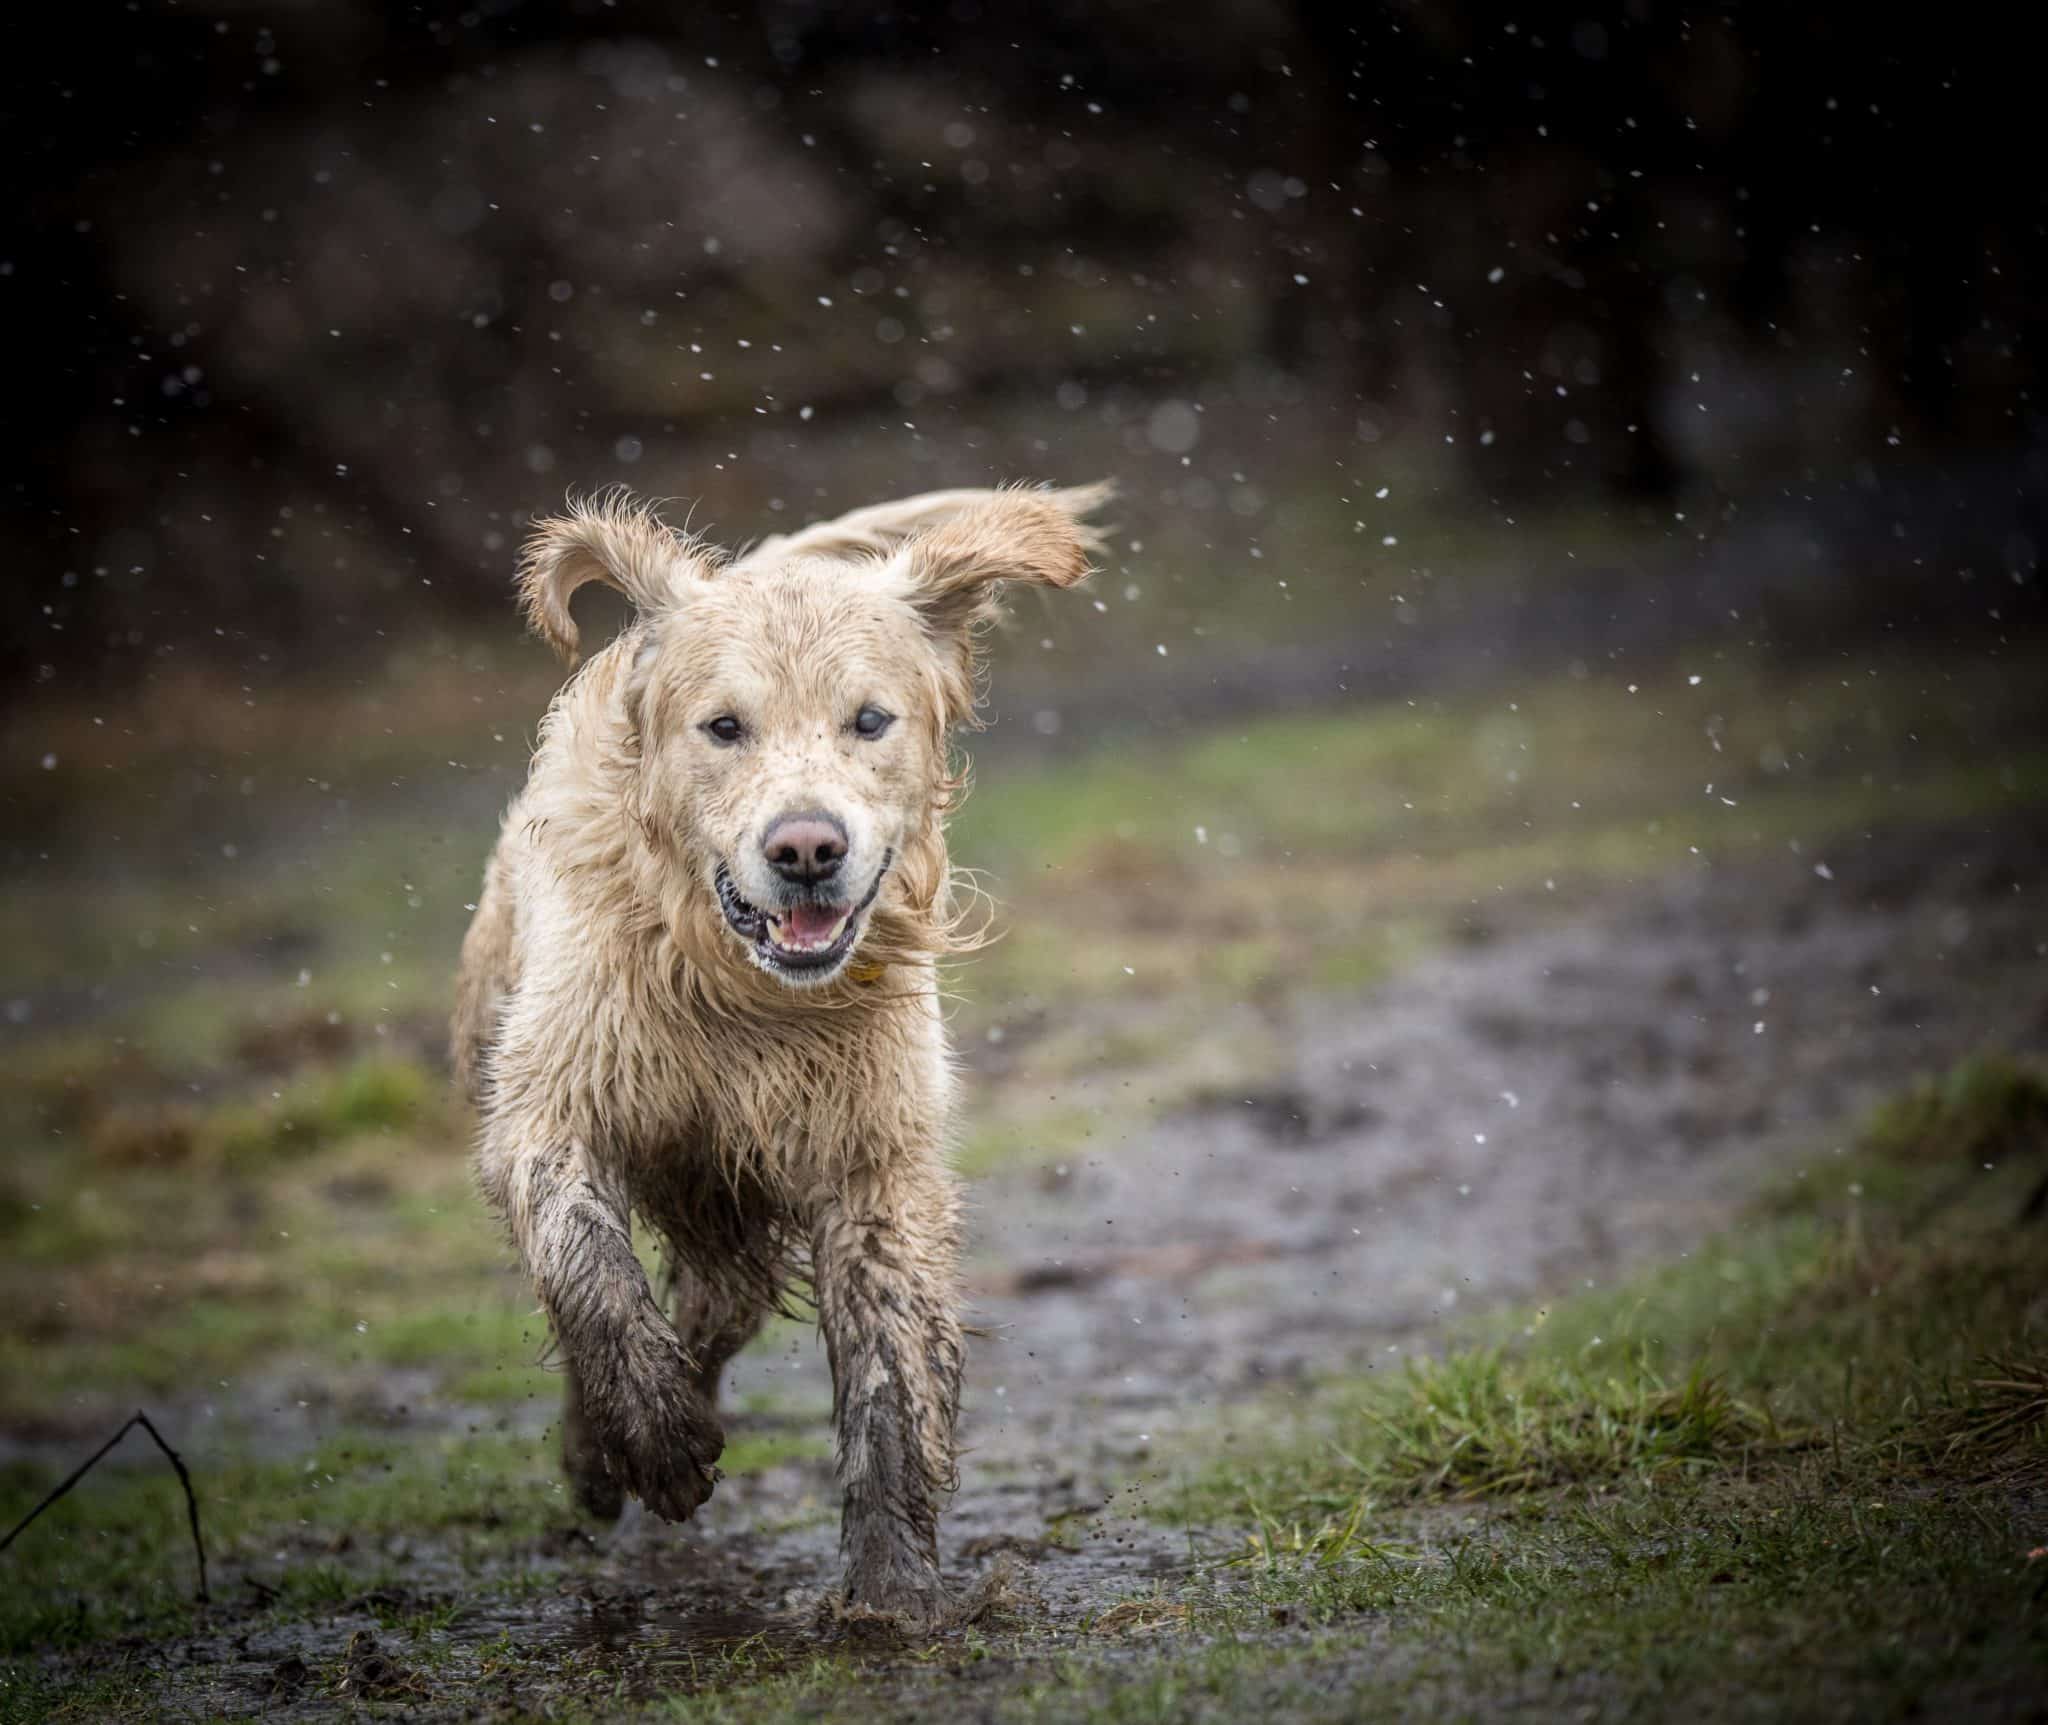 Leptospirosis in dogs: Best protection is vaccine for dogs